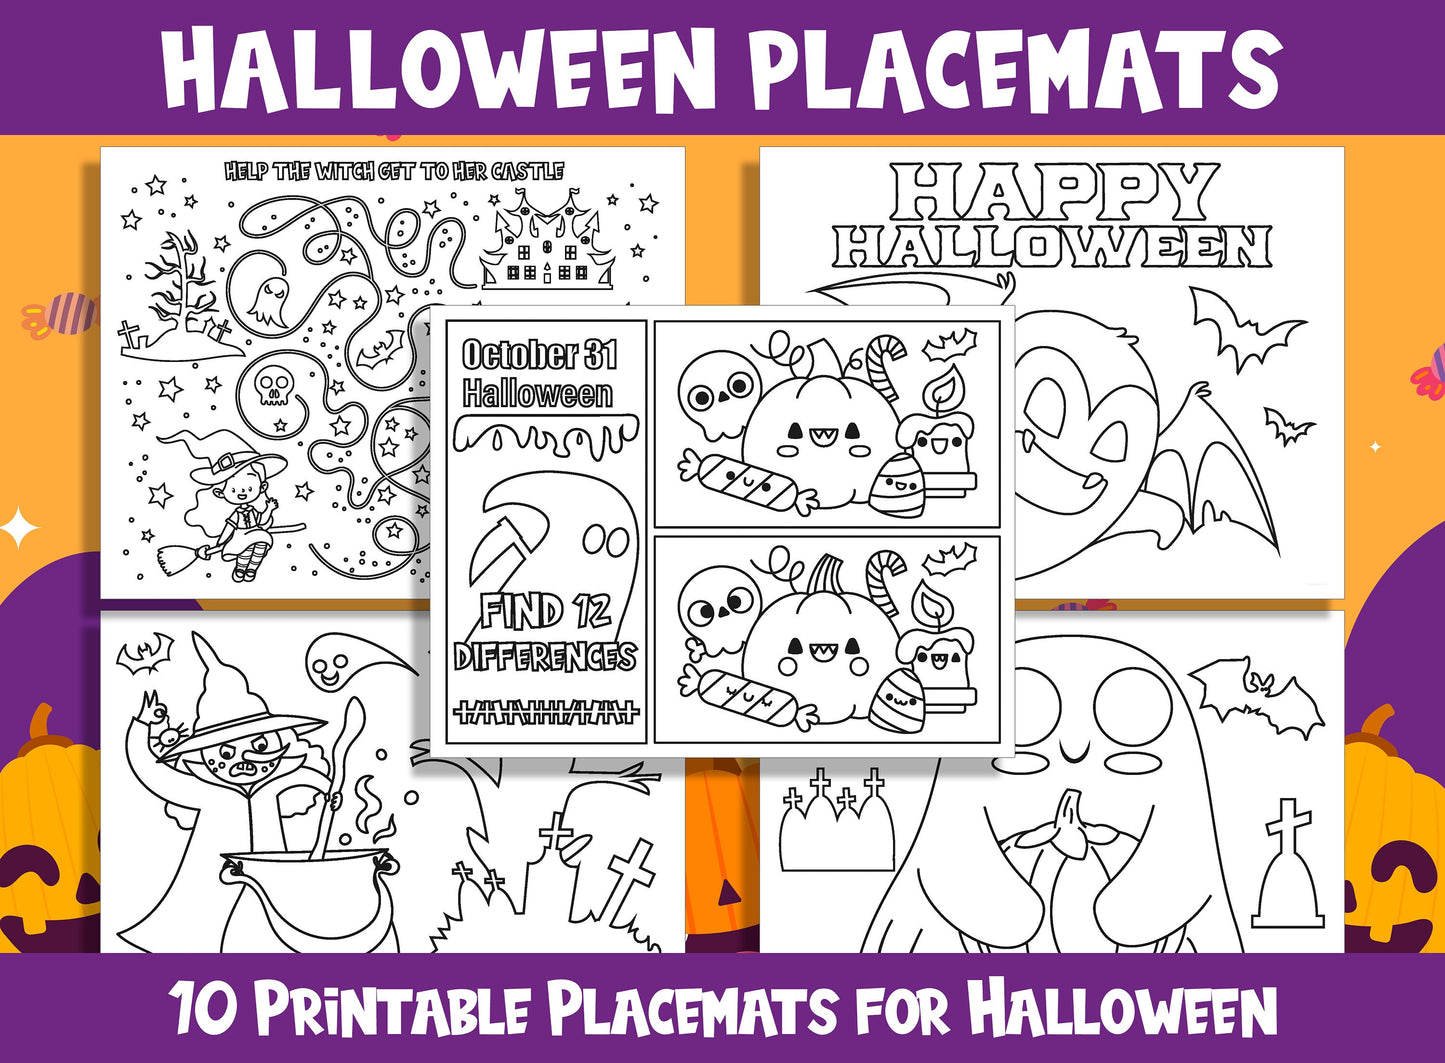 Halloween Fun Placemats: 10 Printable Activities for Kids, PDF File, US Letter Size, Instant Download